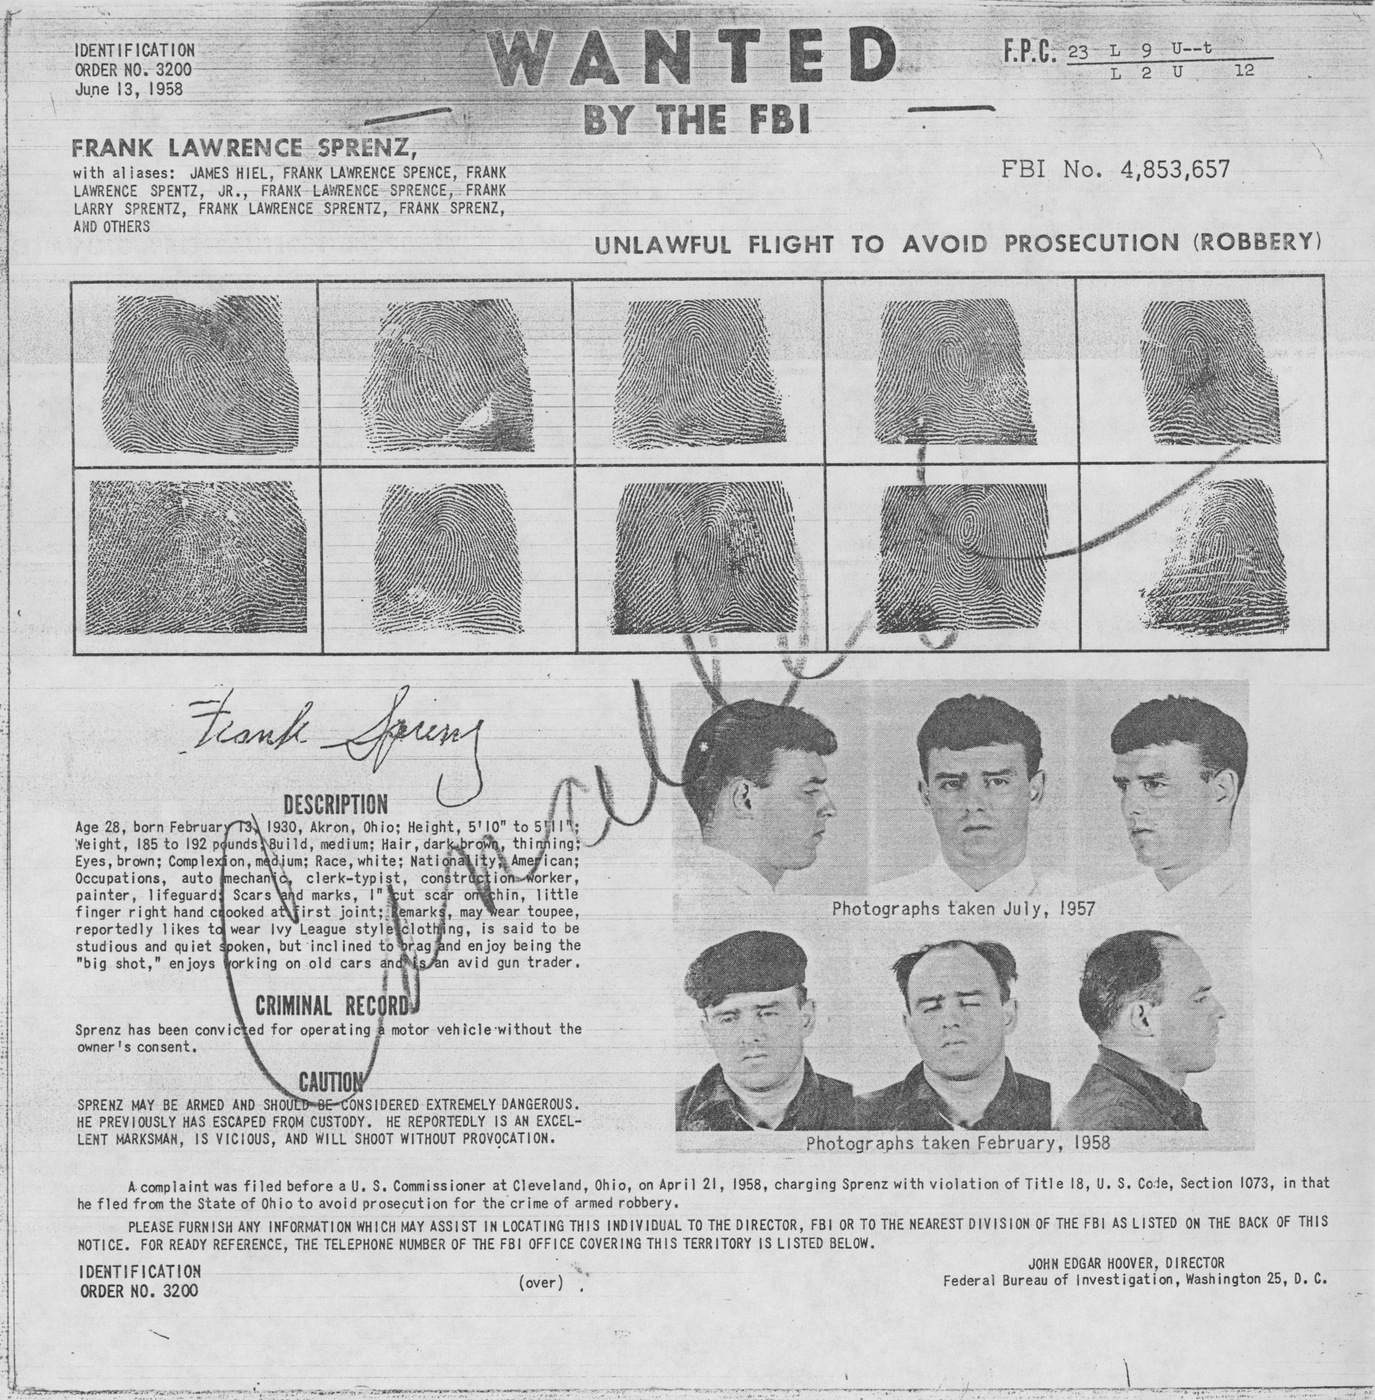 Wanted flyer with photos and fingerprints of Frank Sprenz, also known as The Flying Bank Robber.